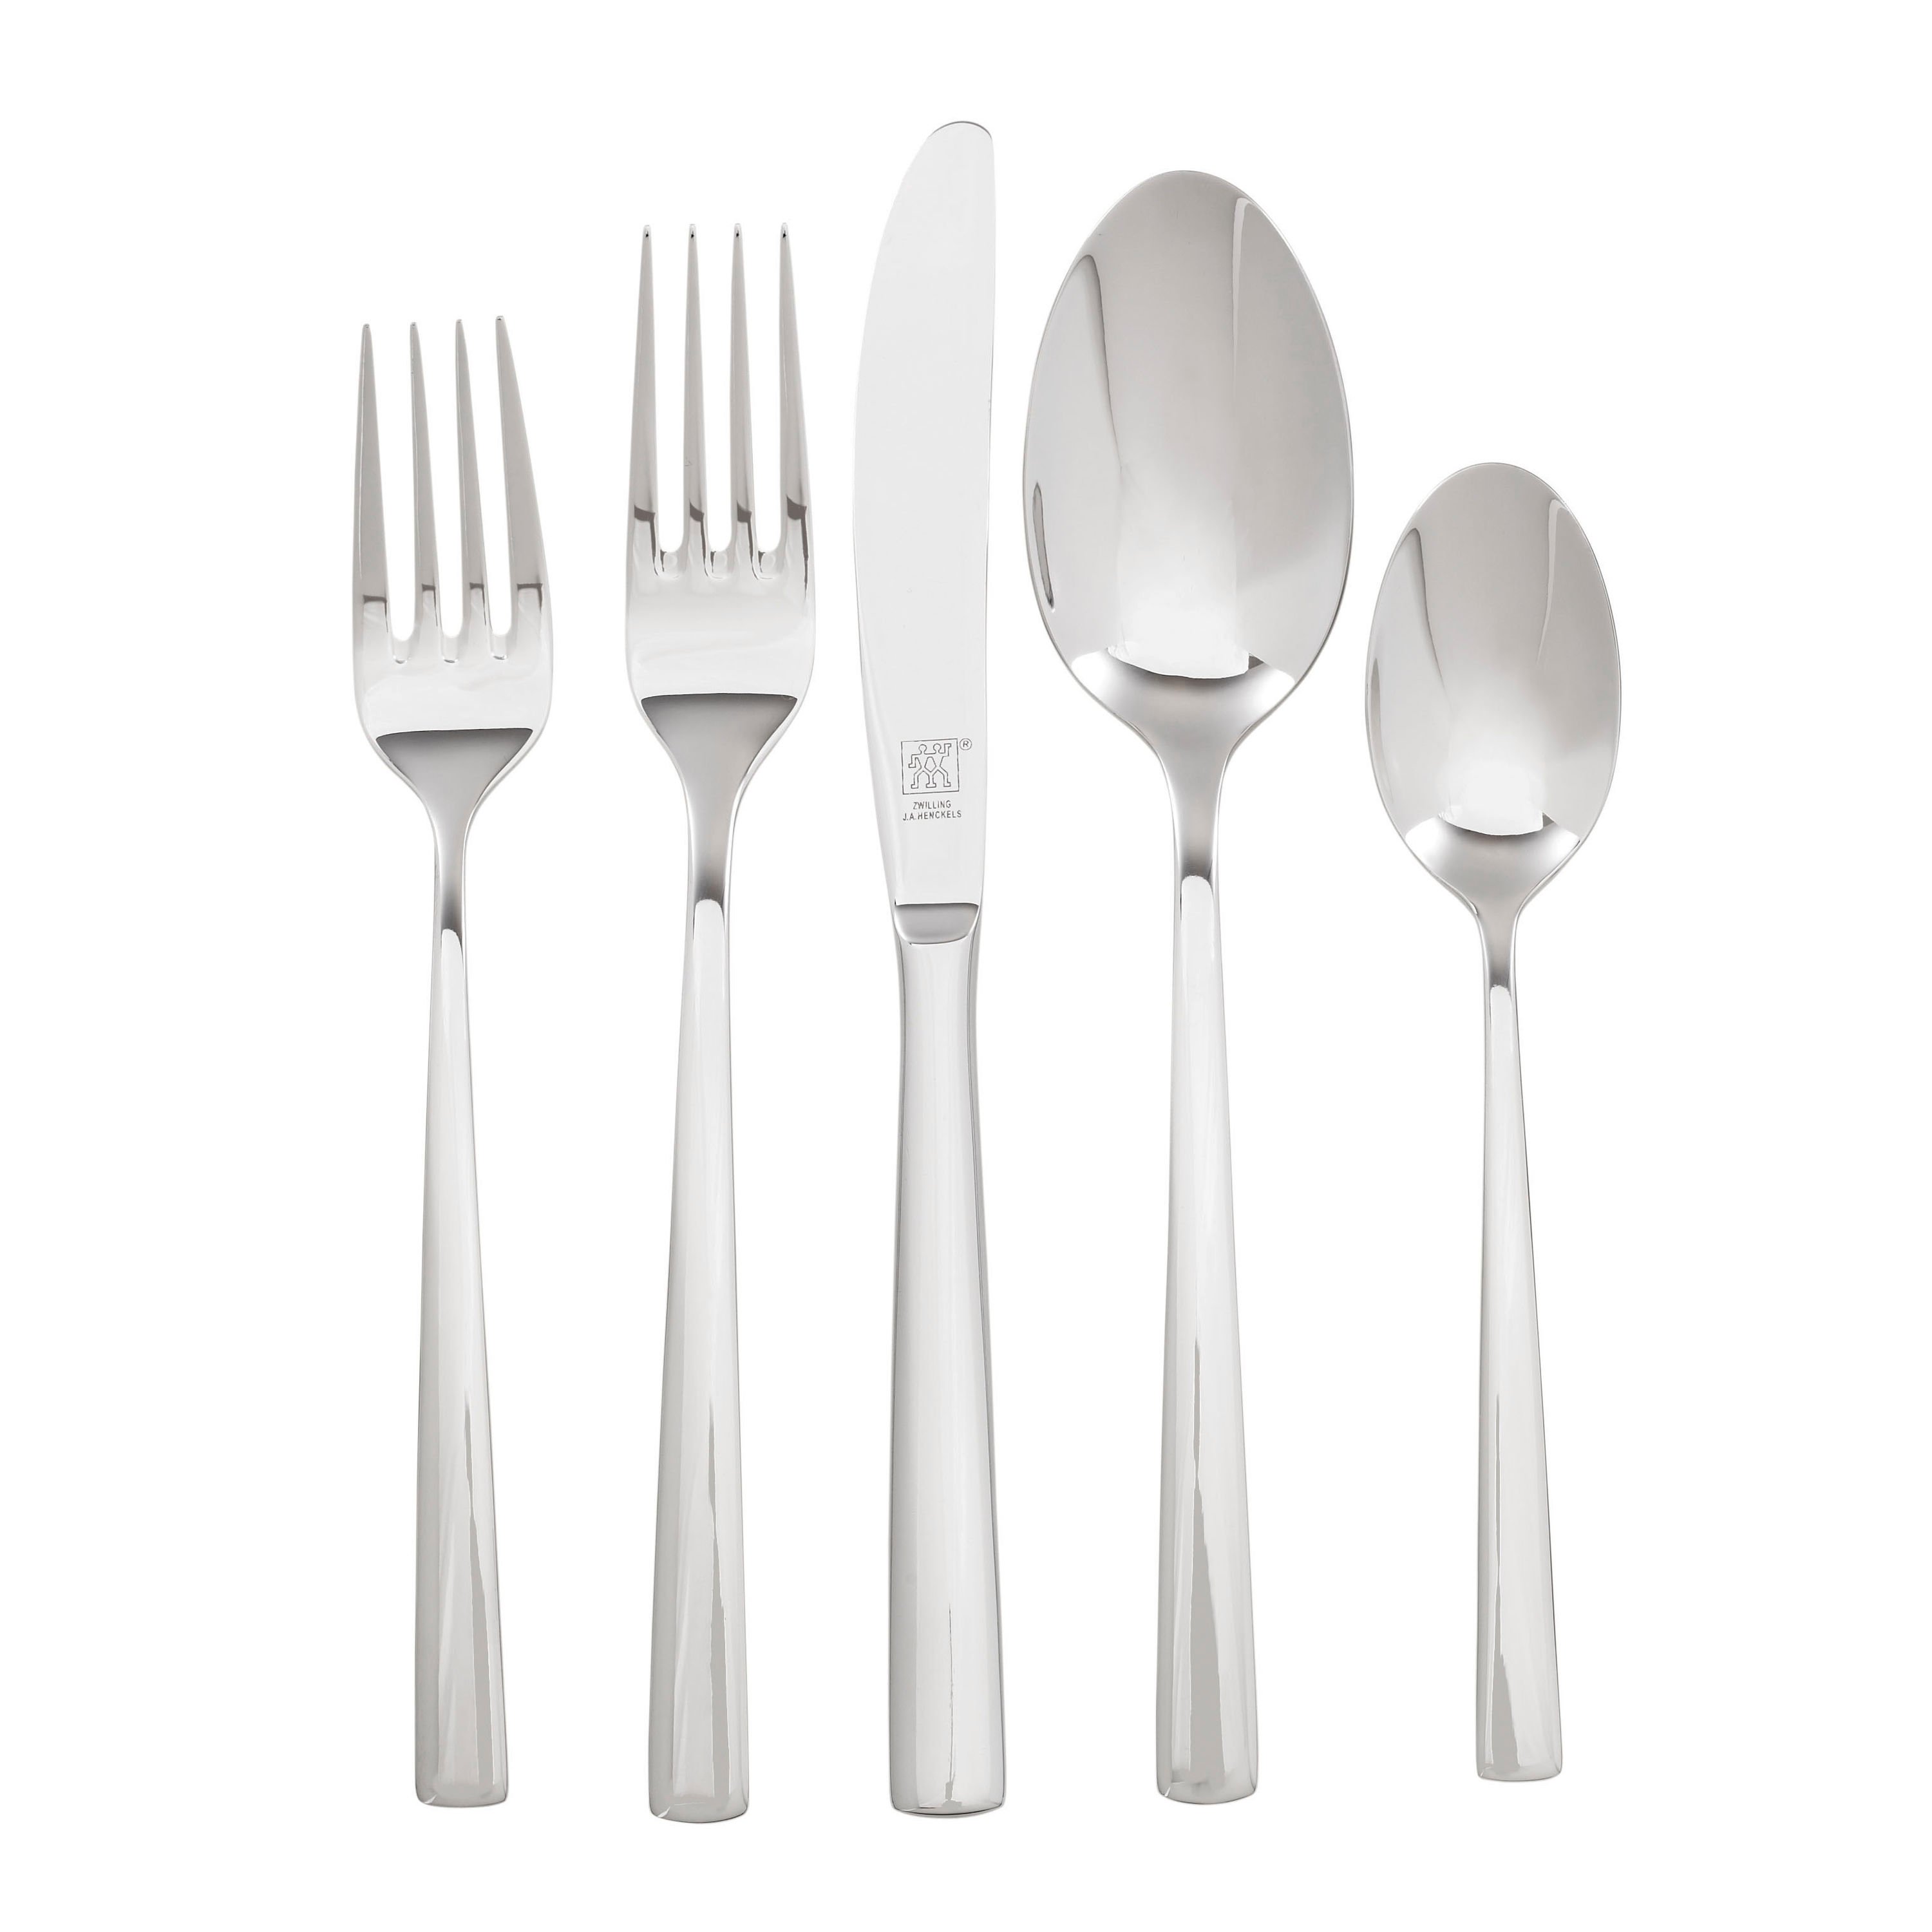 Silverware NEW Your Choice Oneida Stainless FORTE Flatware 